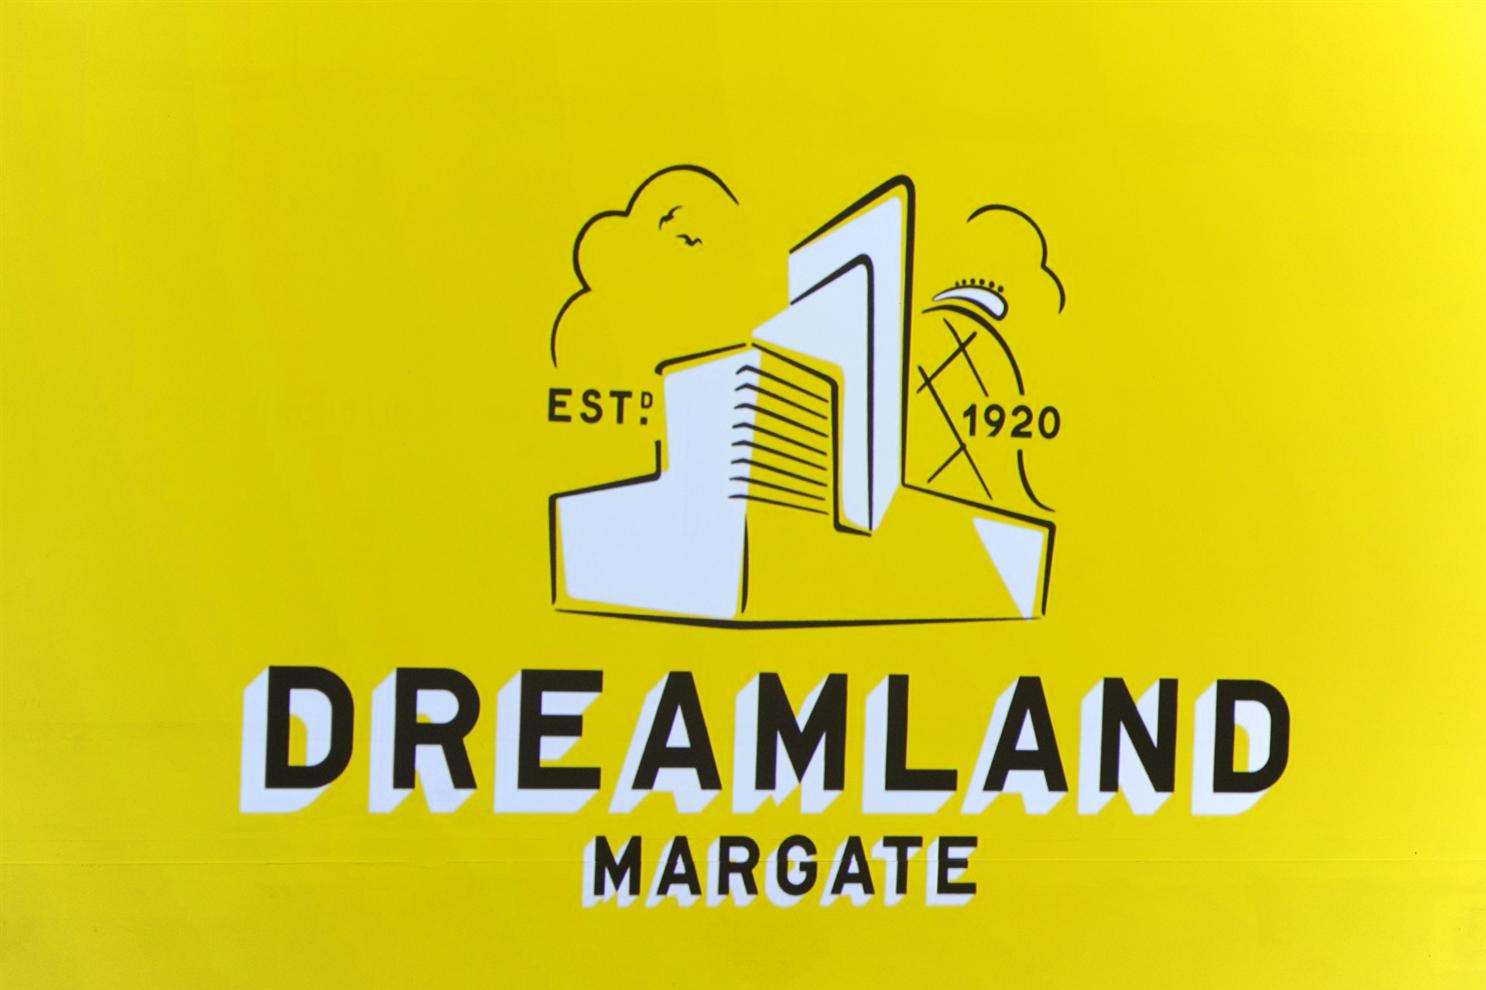 Dreamland sponsored our poster